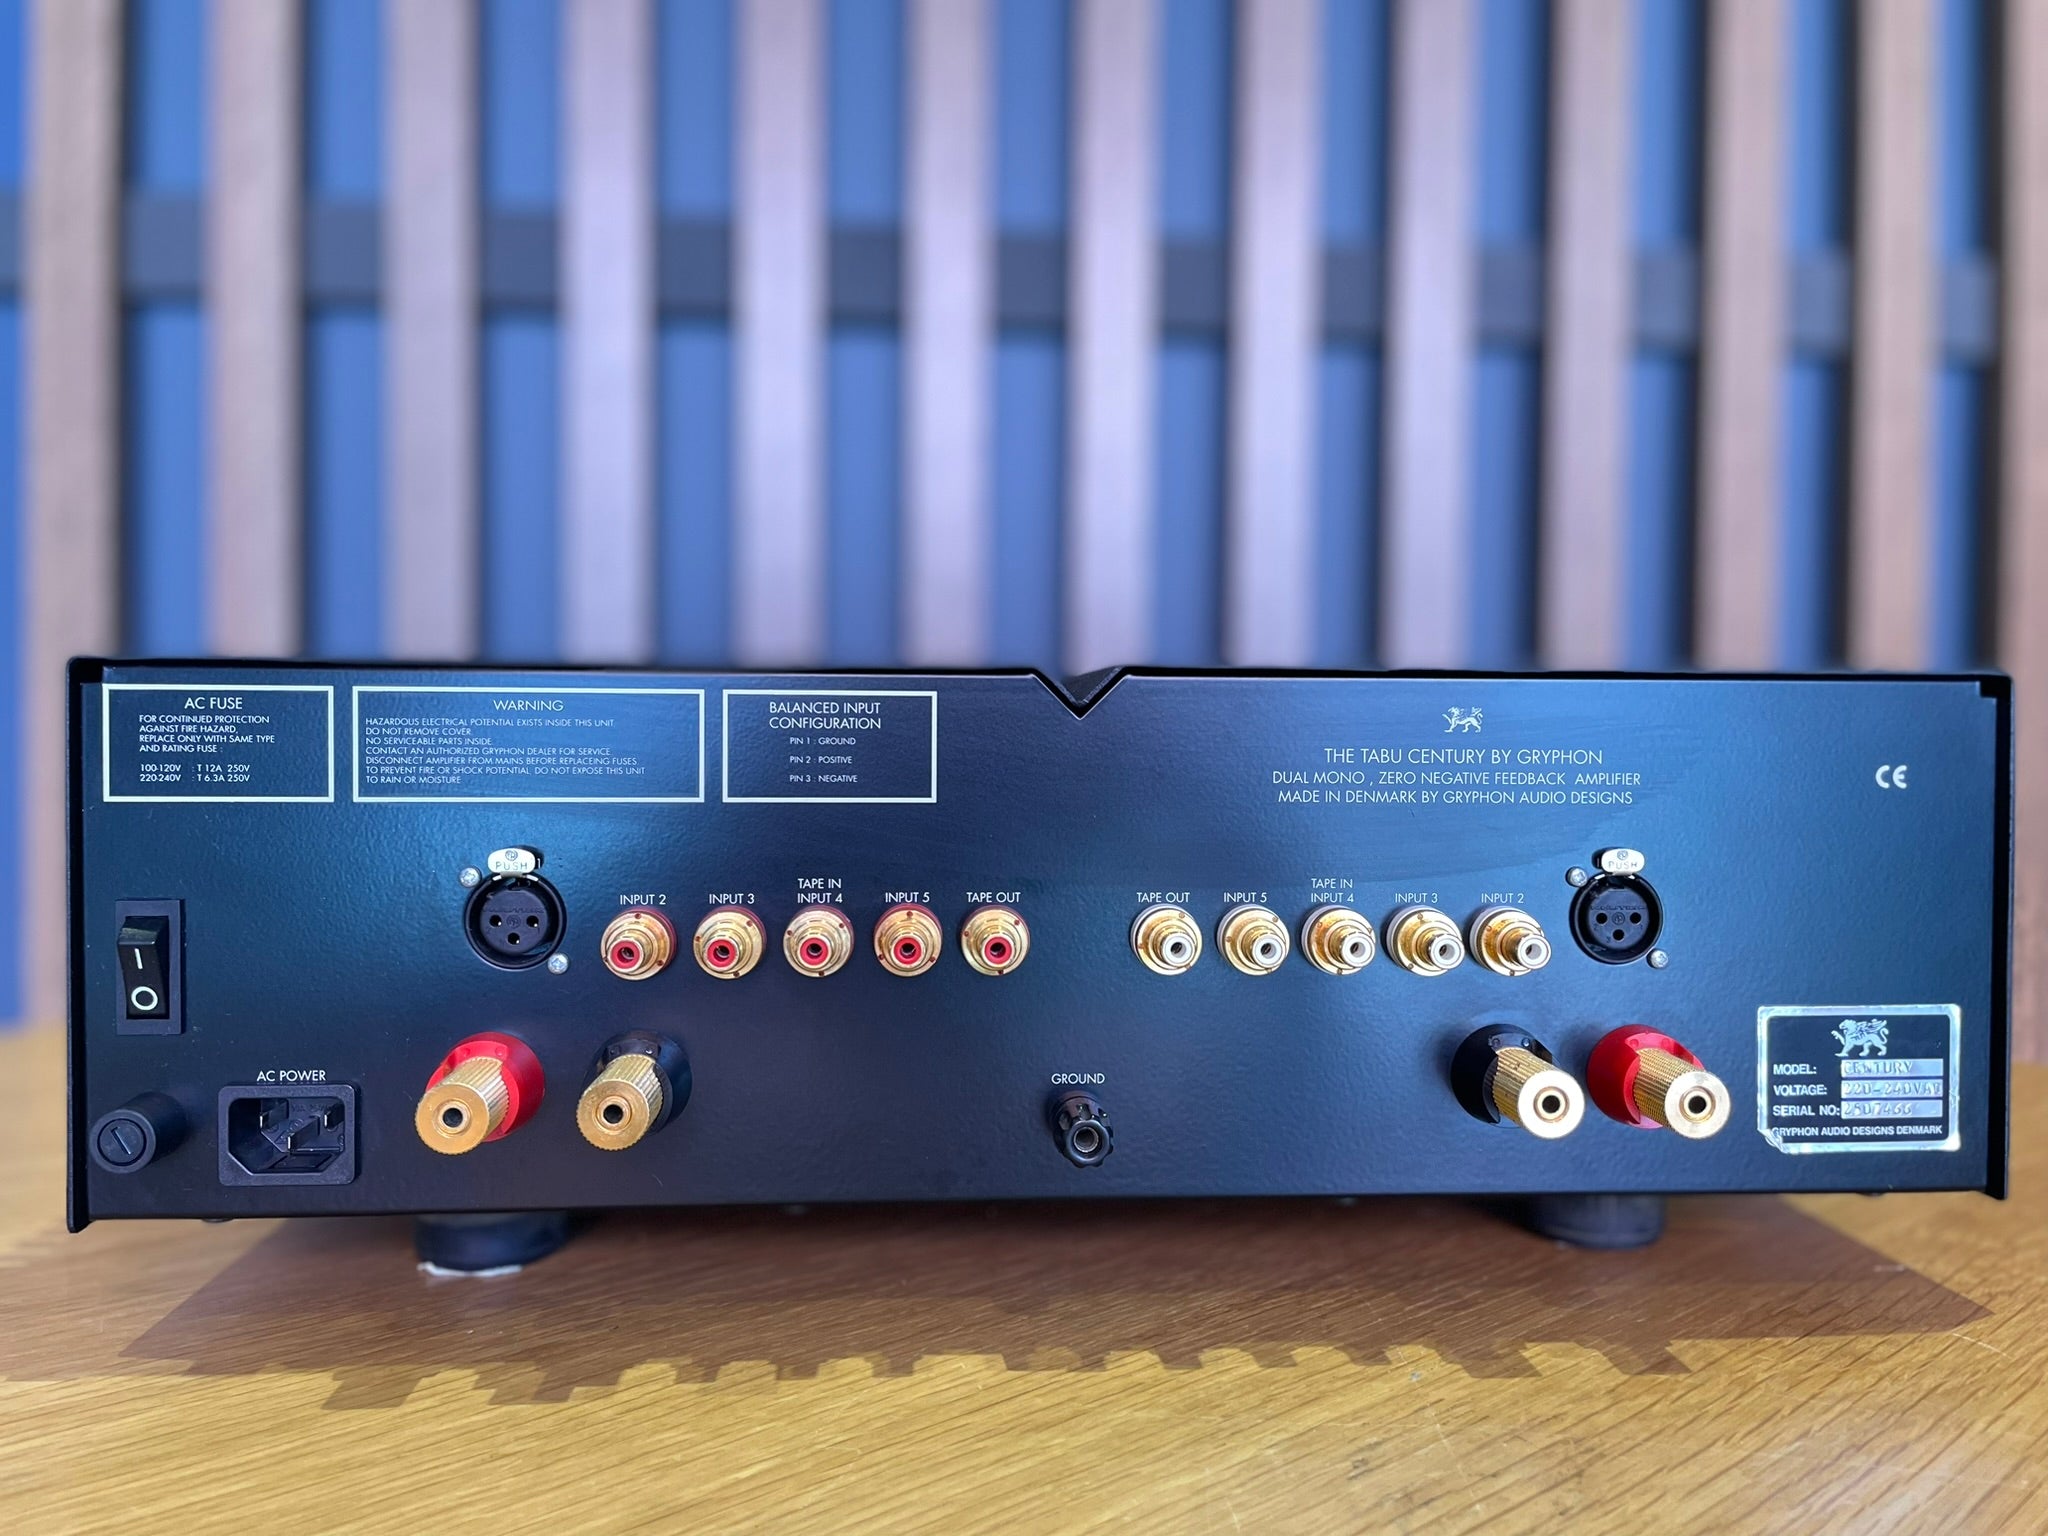 Gryphon Tabu Century Integrated Amplifier - As Traded